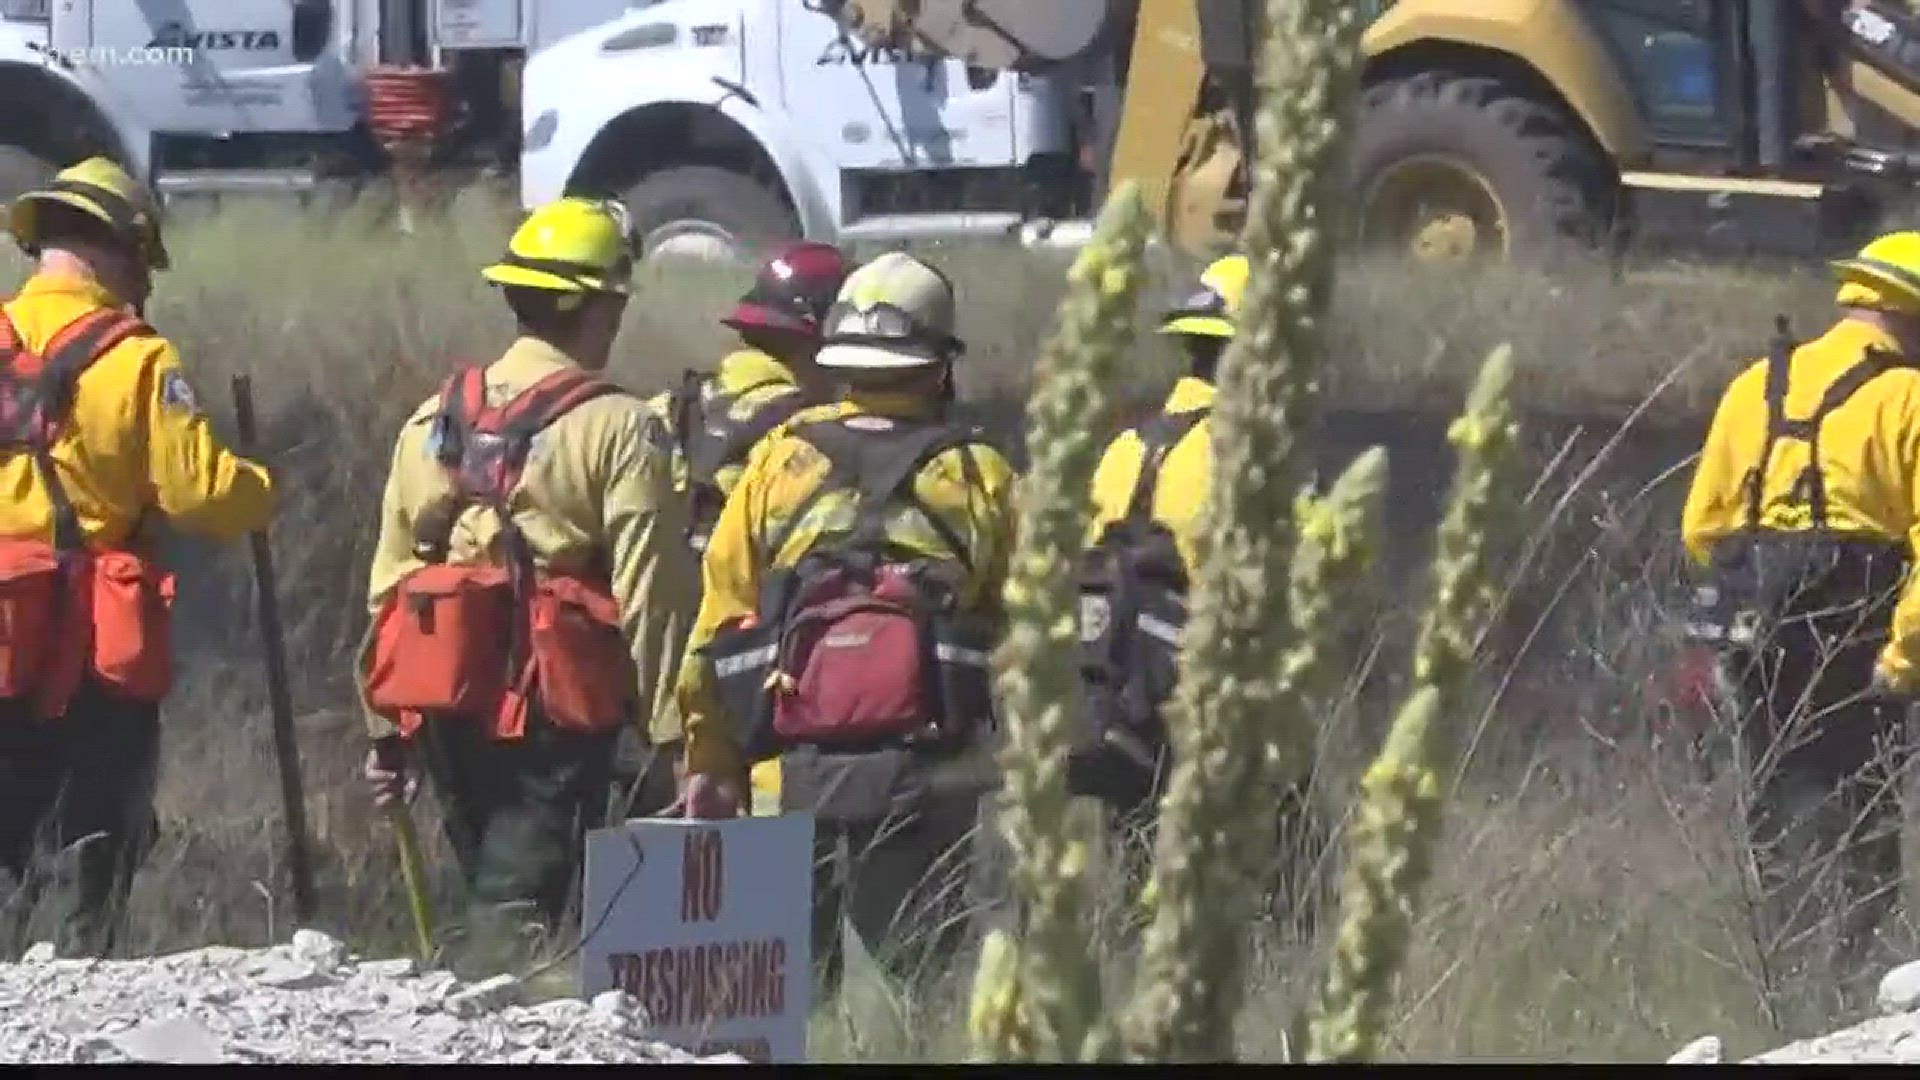 Crews have been working to contain the fire, which was still zero percent contained Wednesday afternoon.